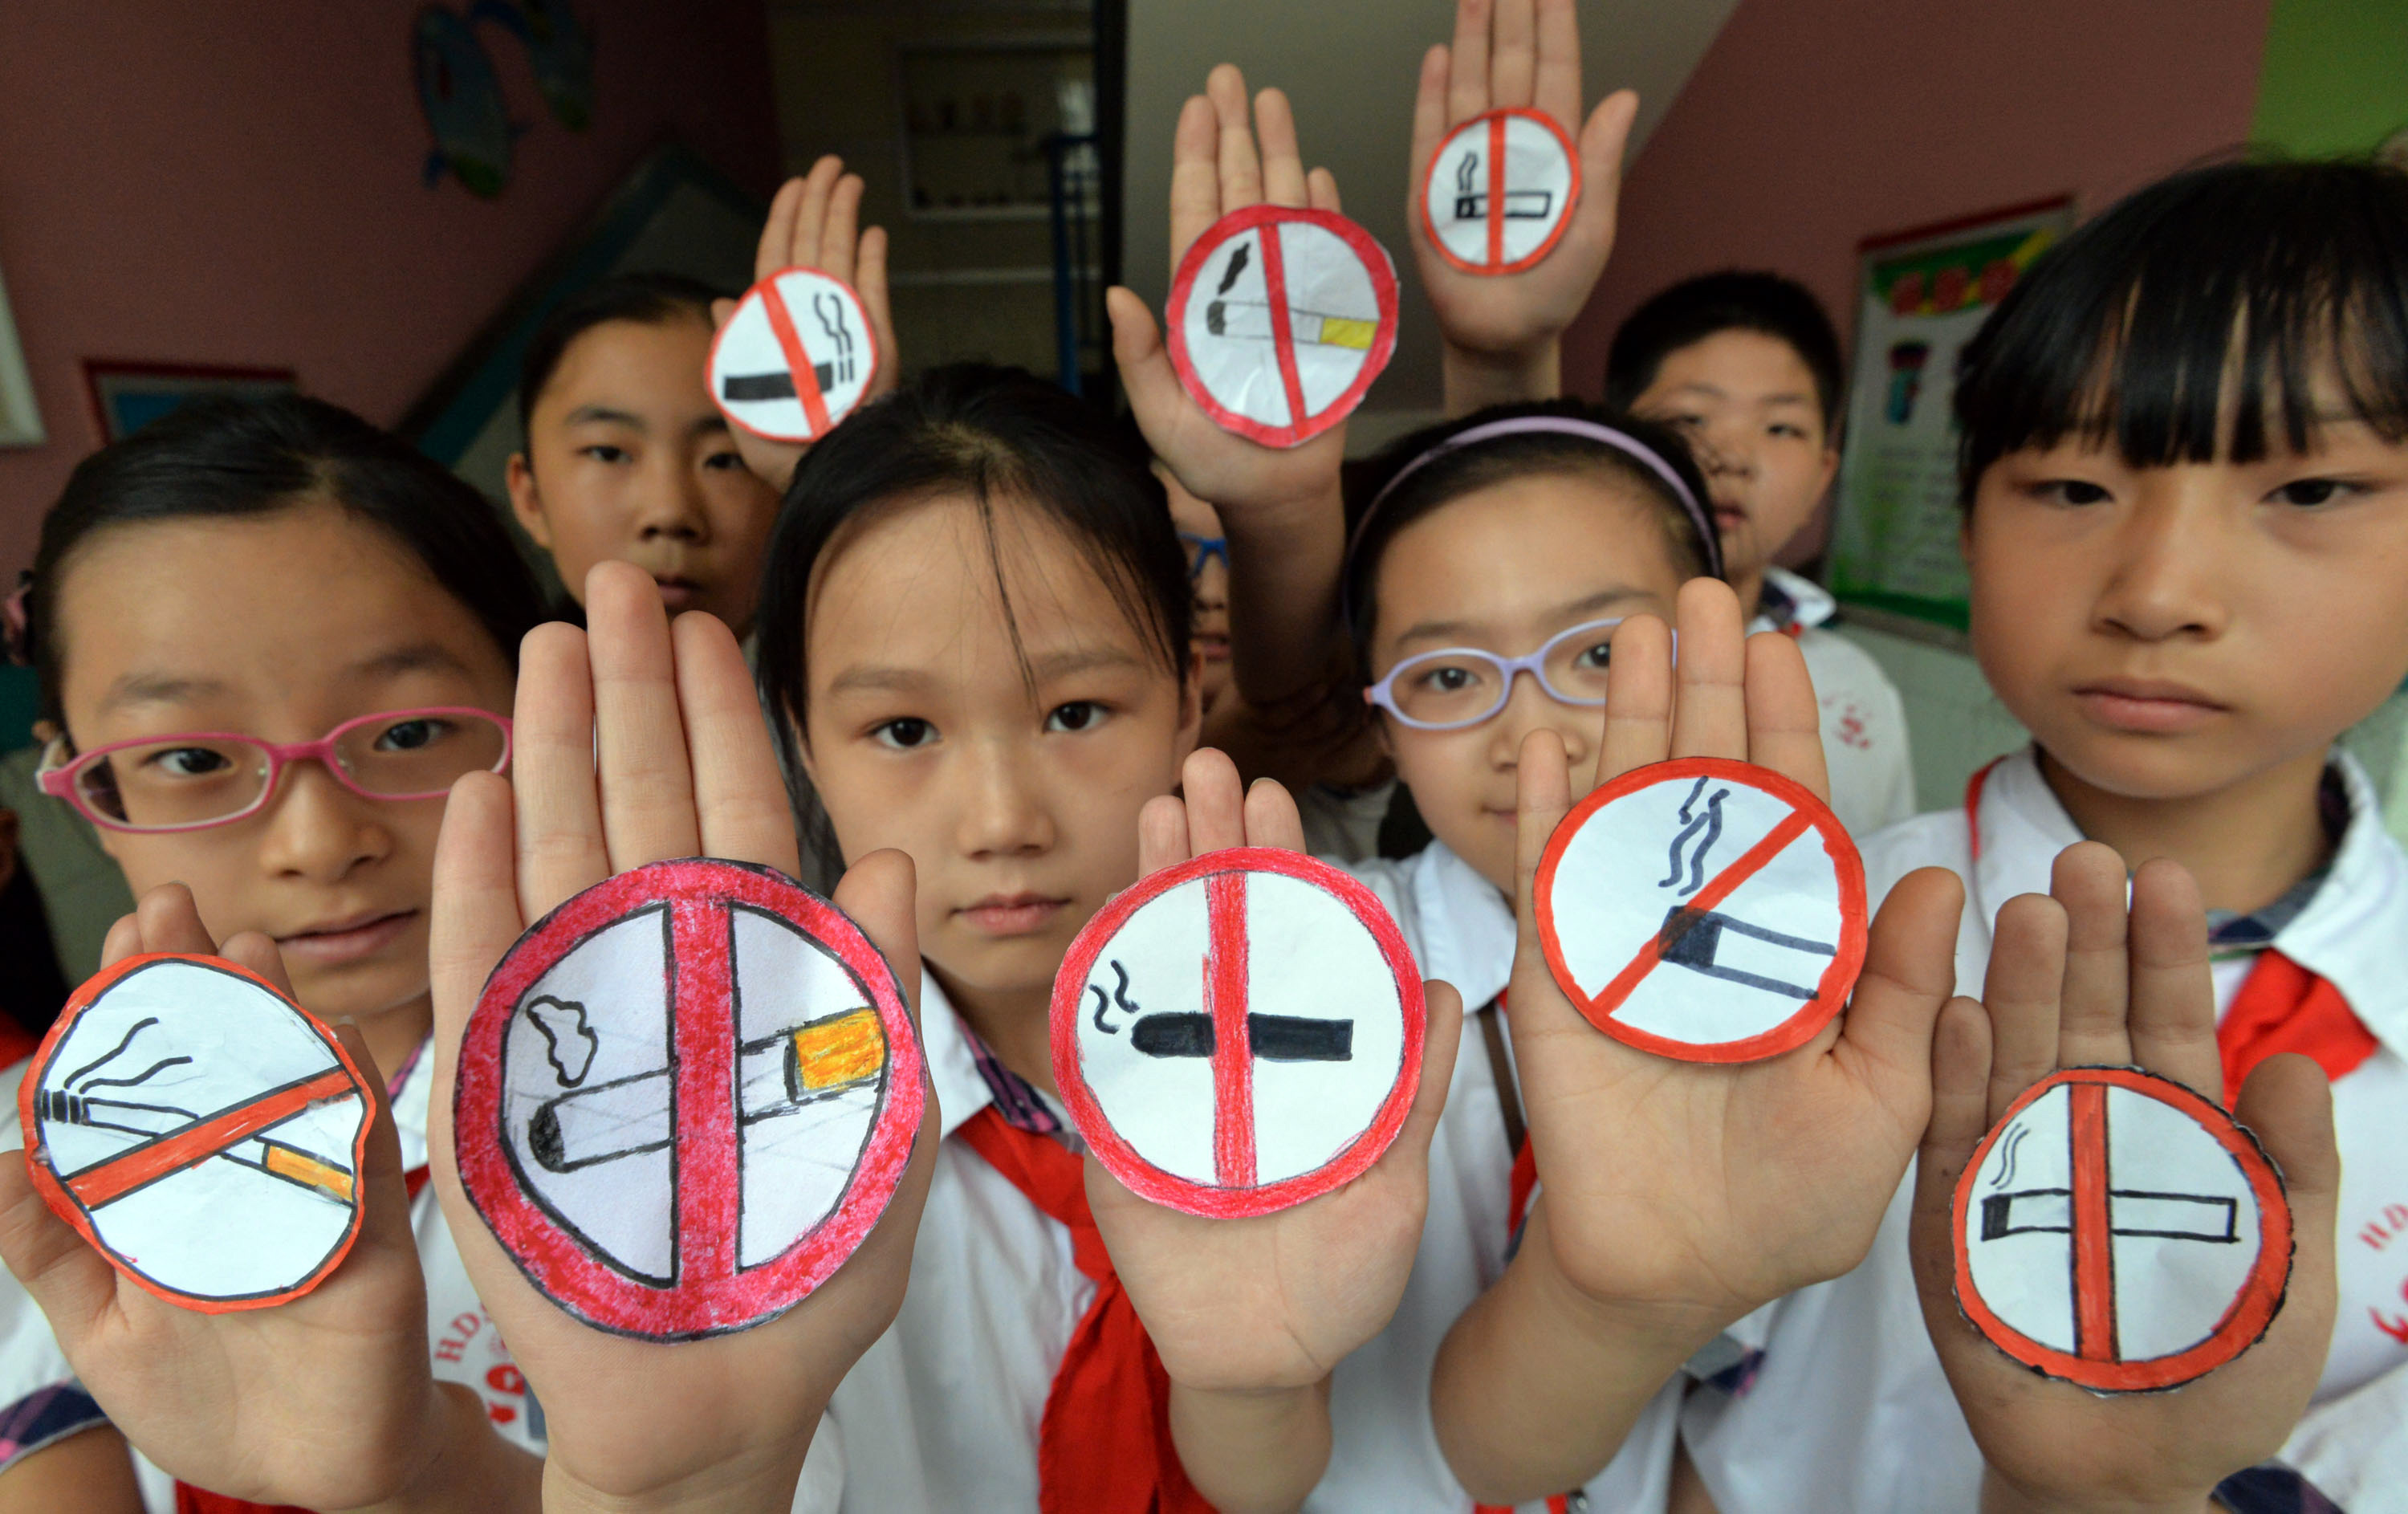 This photo taken on May 30, 2016 shows students wearing masks with no smoking signs to support World No Tobacco Day at a primary school in Handan, northern China's Hebei province.  The slumping output of tobacco products in China has become one of the factors in the country's lowest industrial production rate since the global financial crisis during the first two months of the year. / AFP PHOTO / STR / China OUT